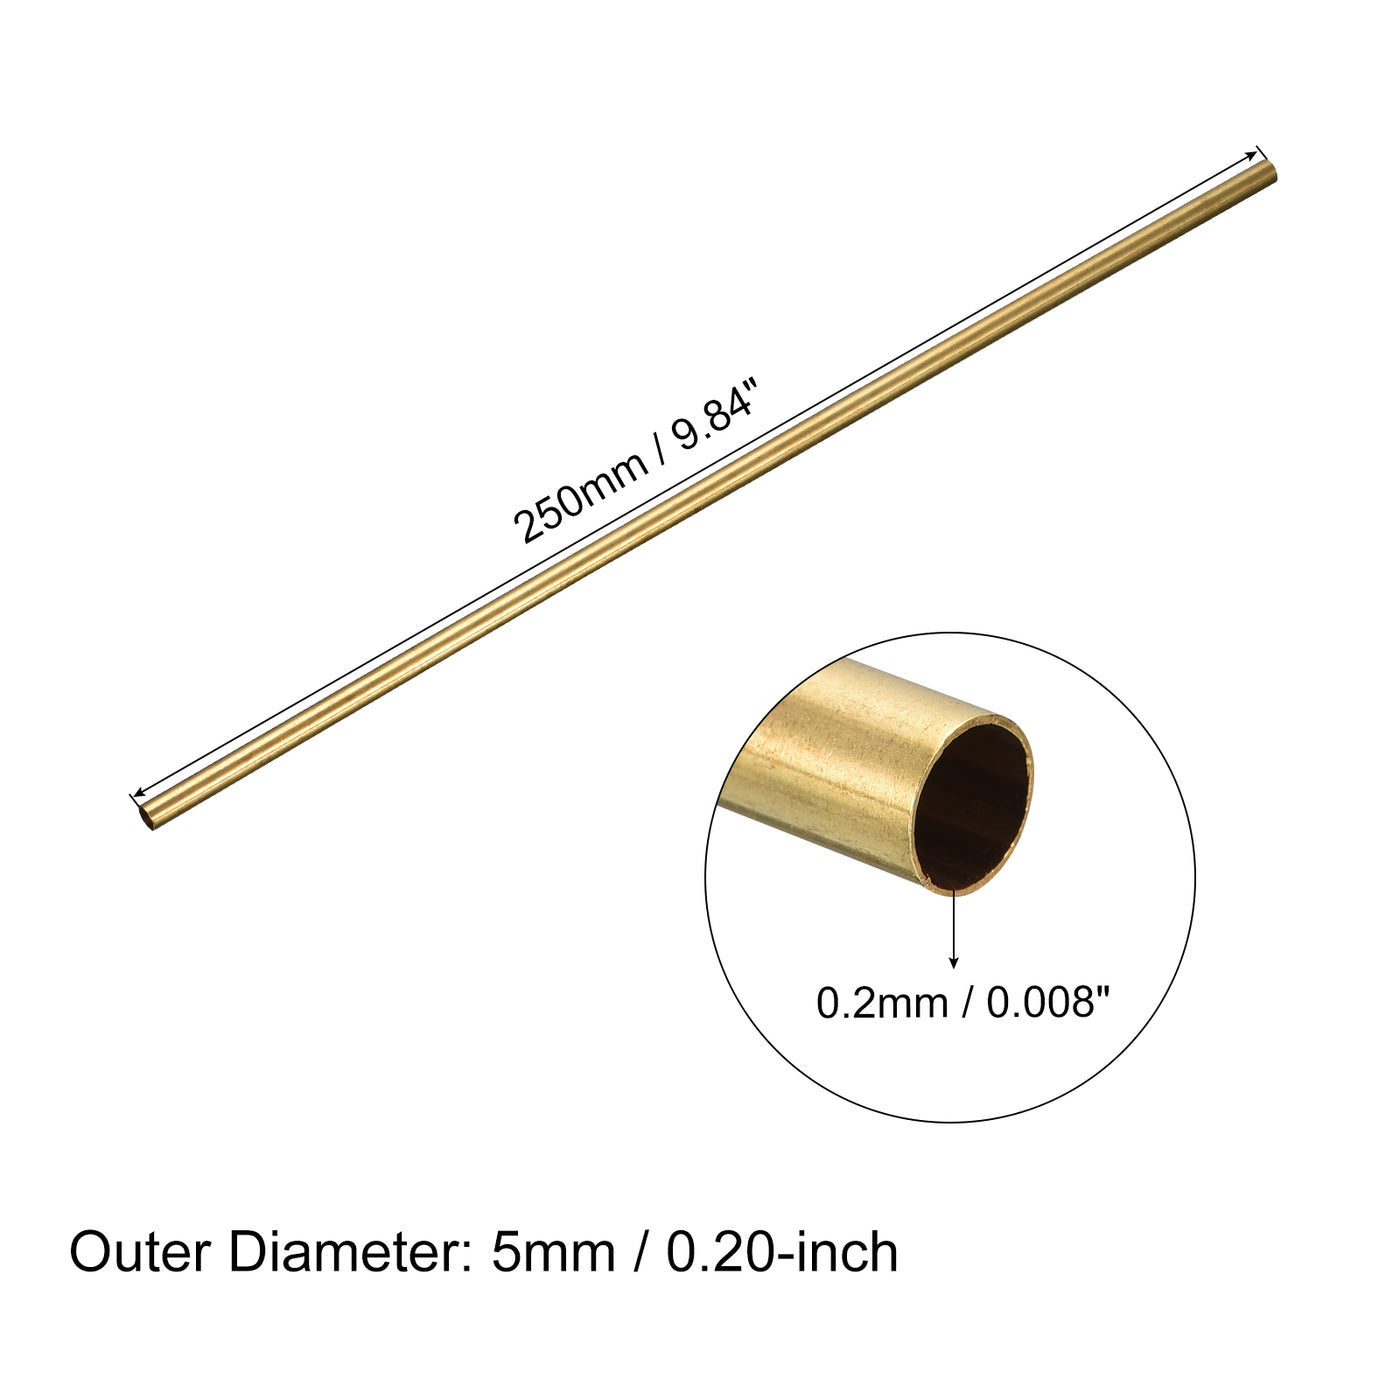 uxcell Uxcell Brass Round Tube 5mm OD 0.2mm Wall Thickness 250mm Length Pipe Tubing 3 Pcs